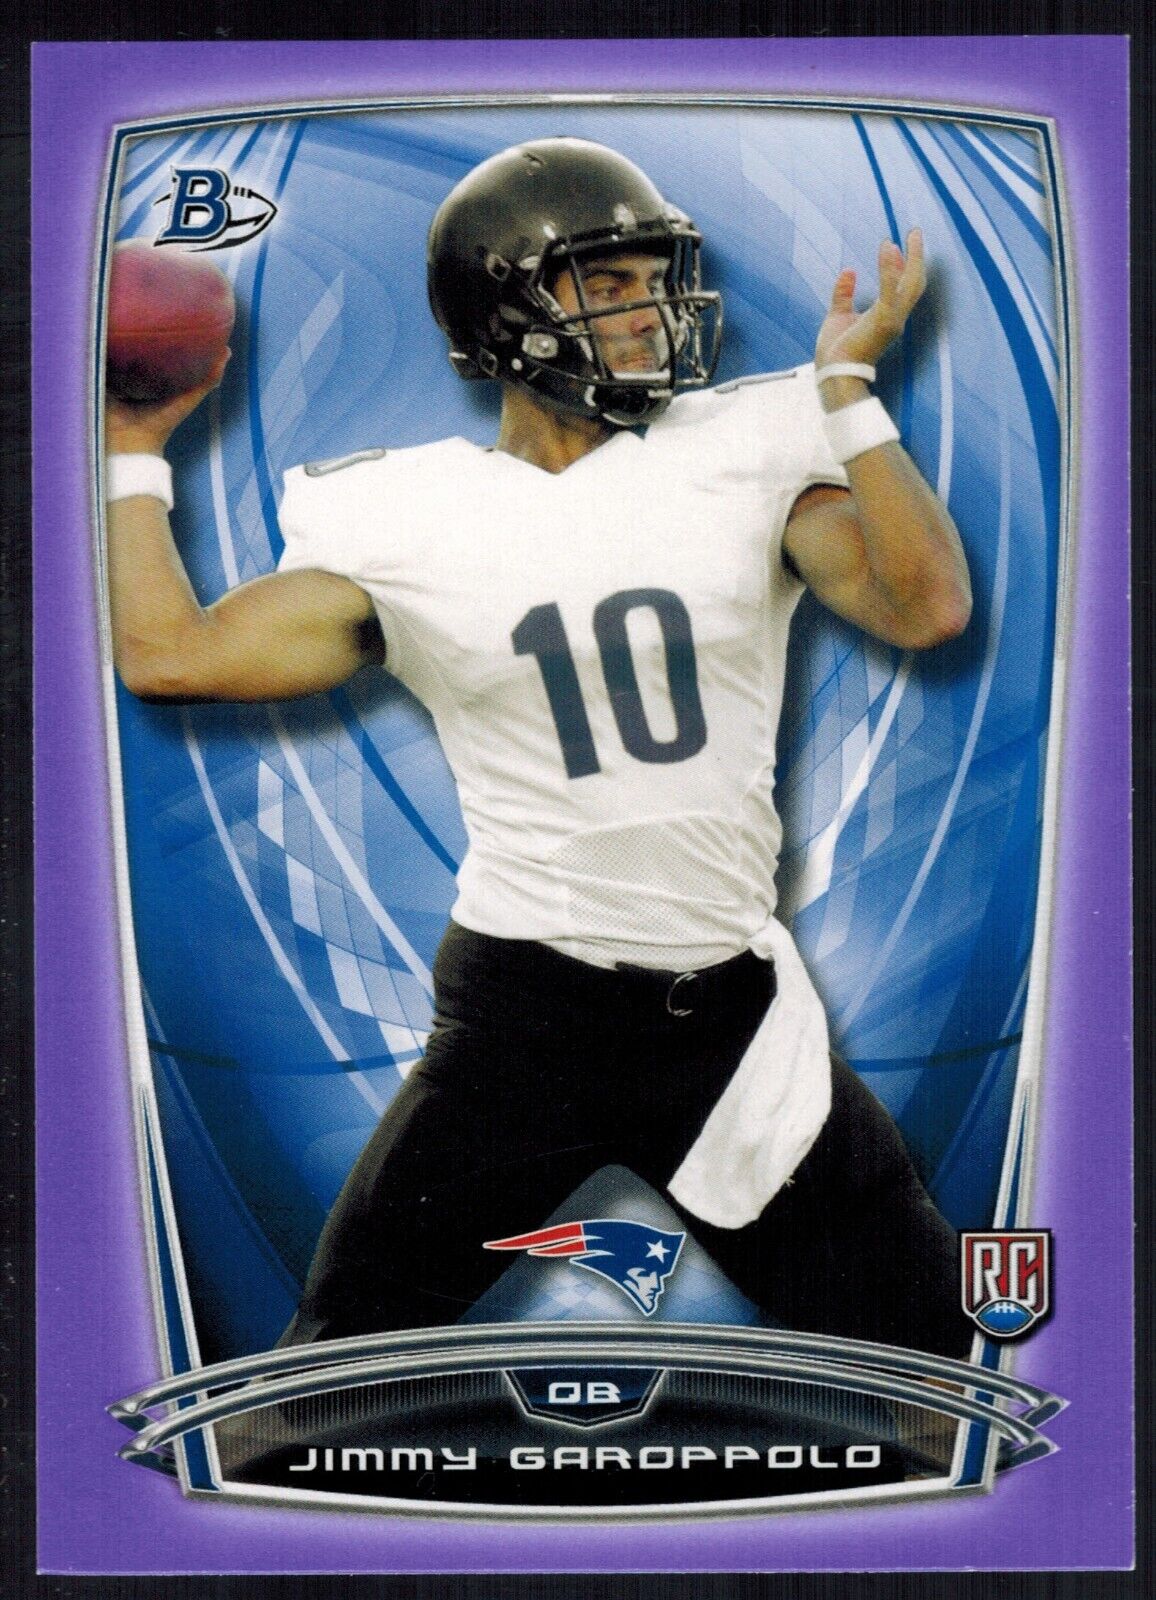 JIMMY GAROPPOLO 2014 Bowman PURPLE BORDER #105 ROOKIE CARD. rookie card picture